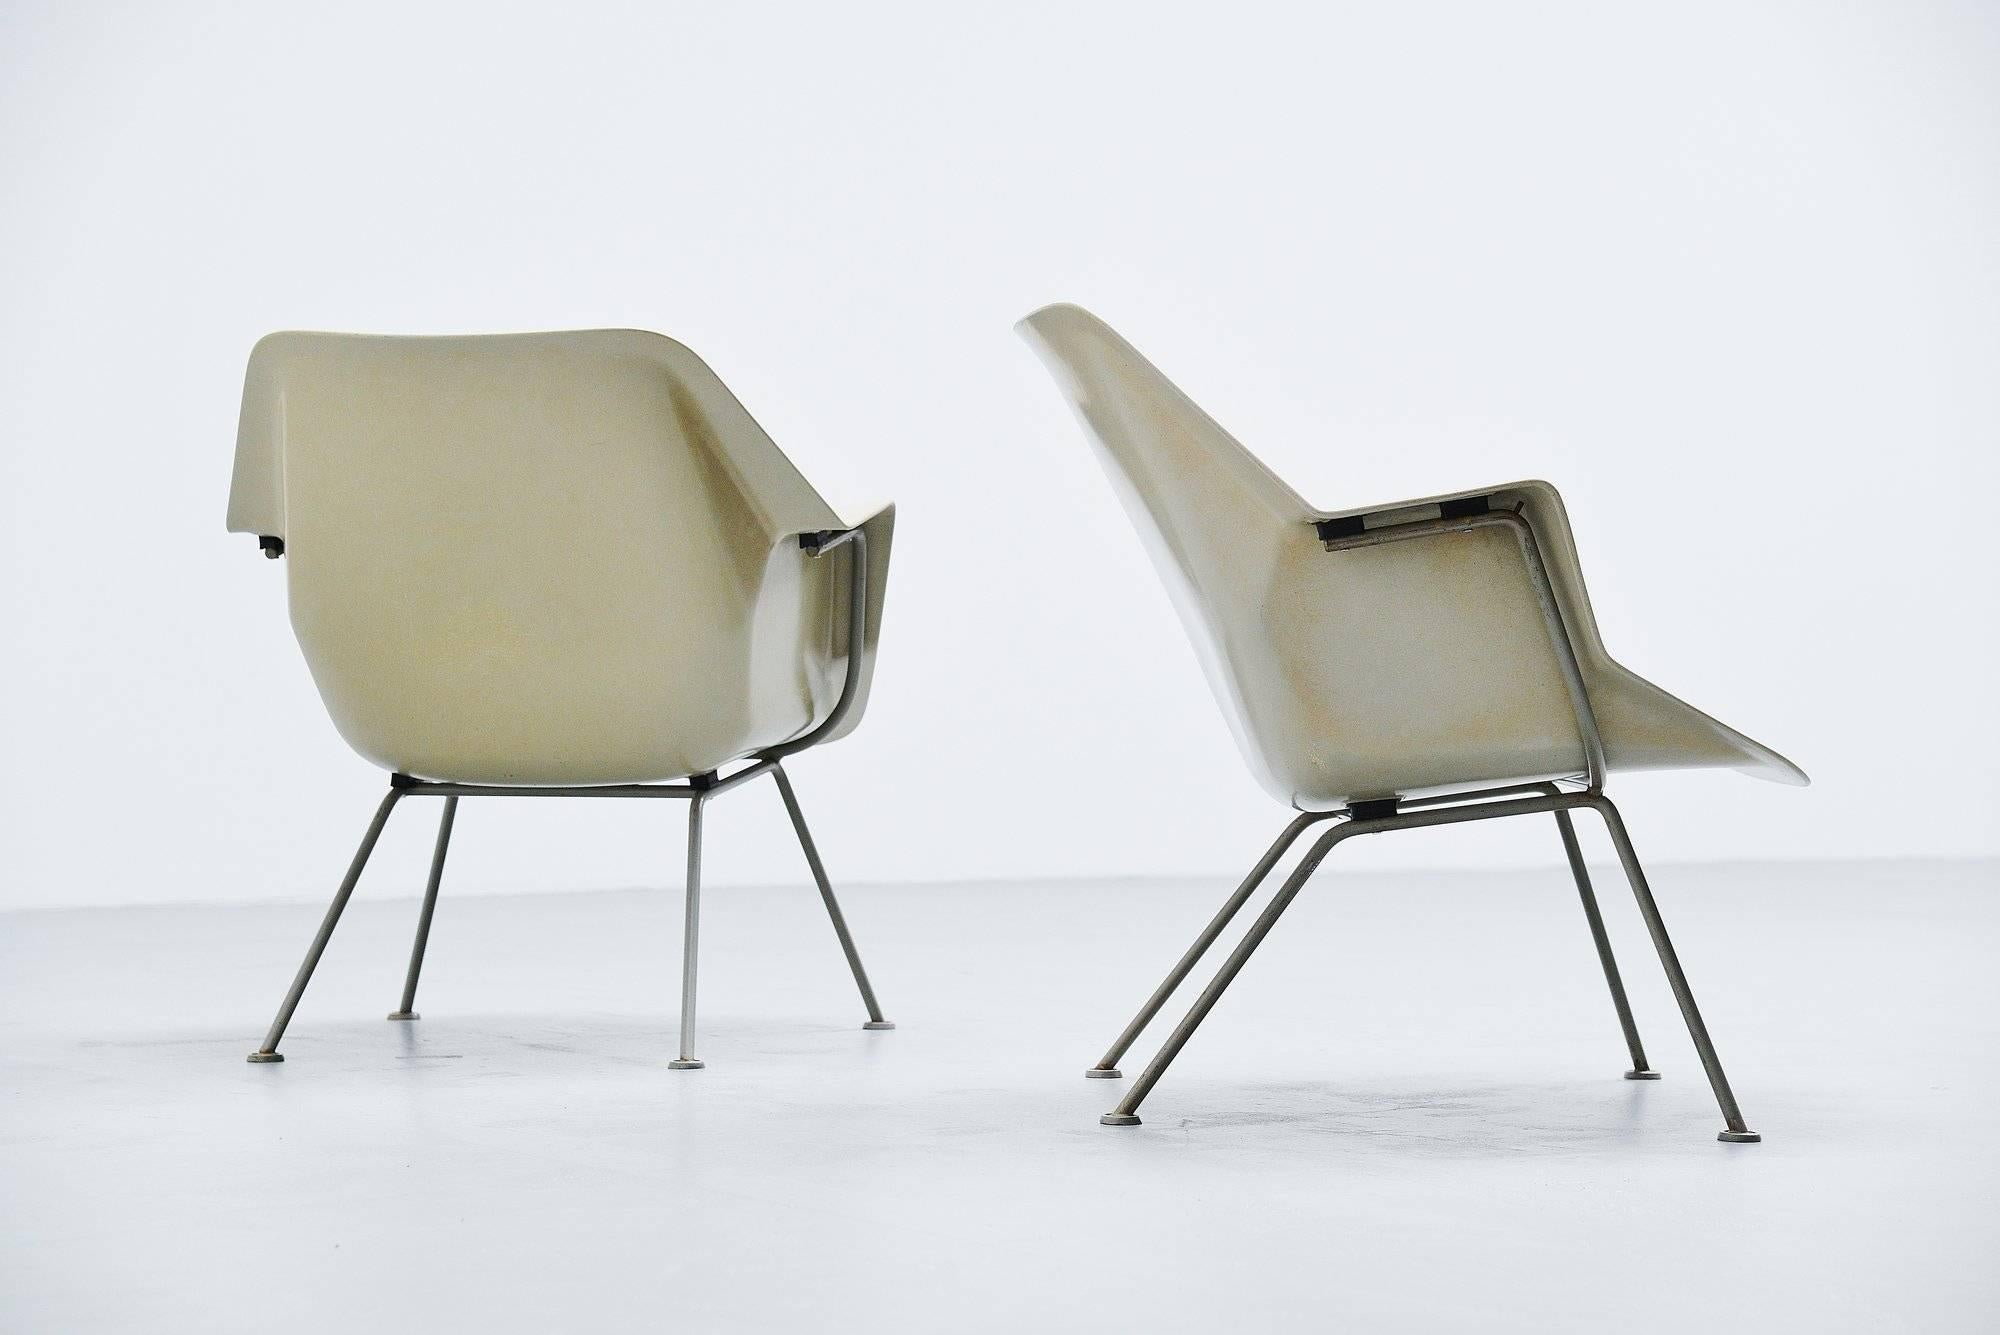 A pair of light grey polyester lounge chairs model No. 416 designed by Wim Rietveld (son of Gerrit Thomas Rietveld) and Andre Cordemeyer for Gispen, Culemborg 1957. This first Dutch polyester armchair was made of on piece of molded polyester, a new